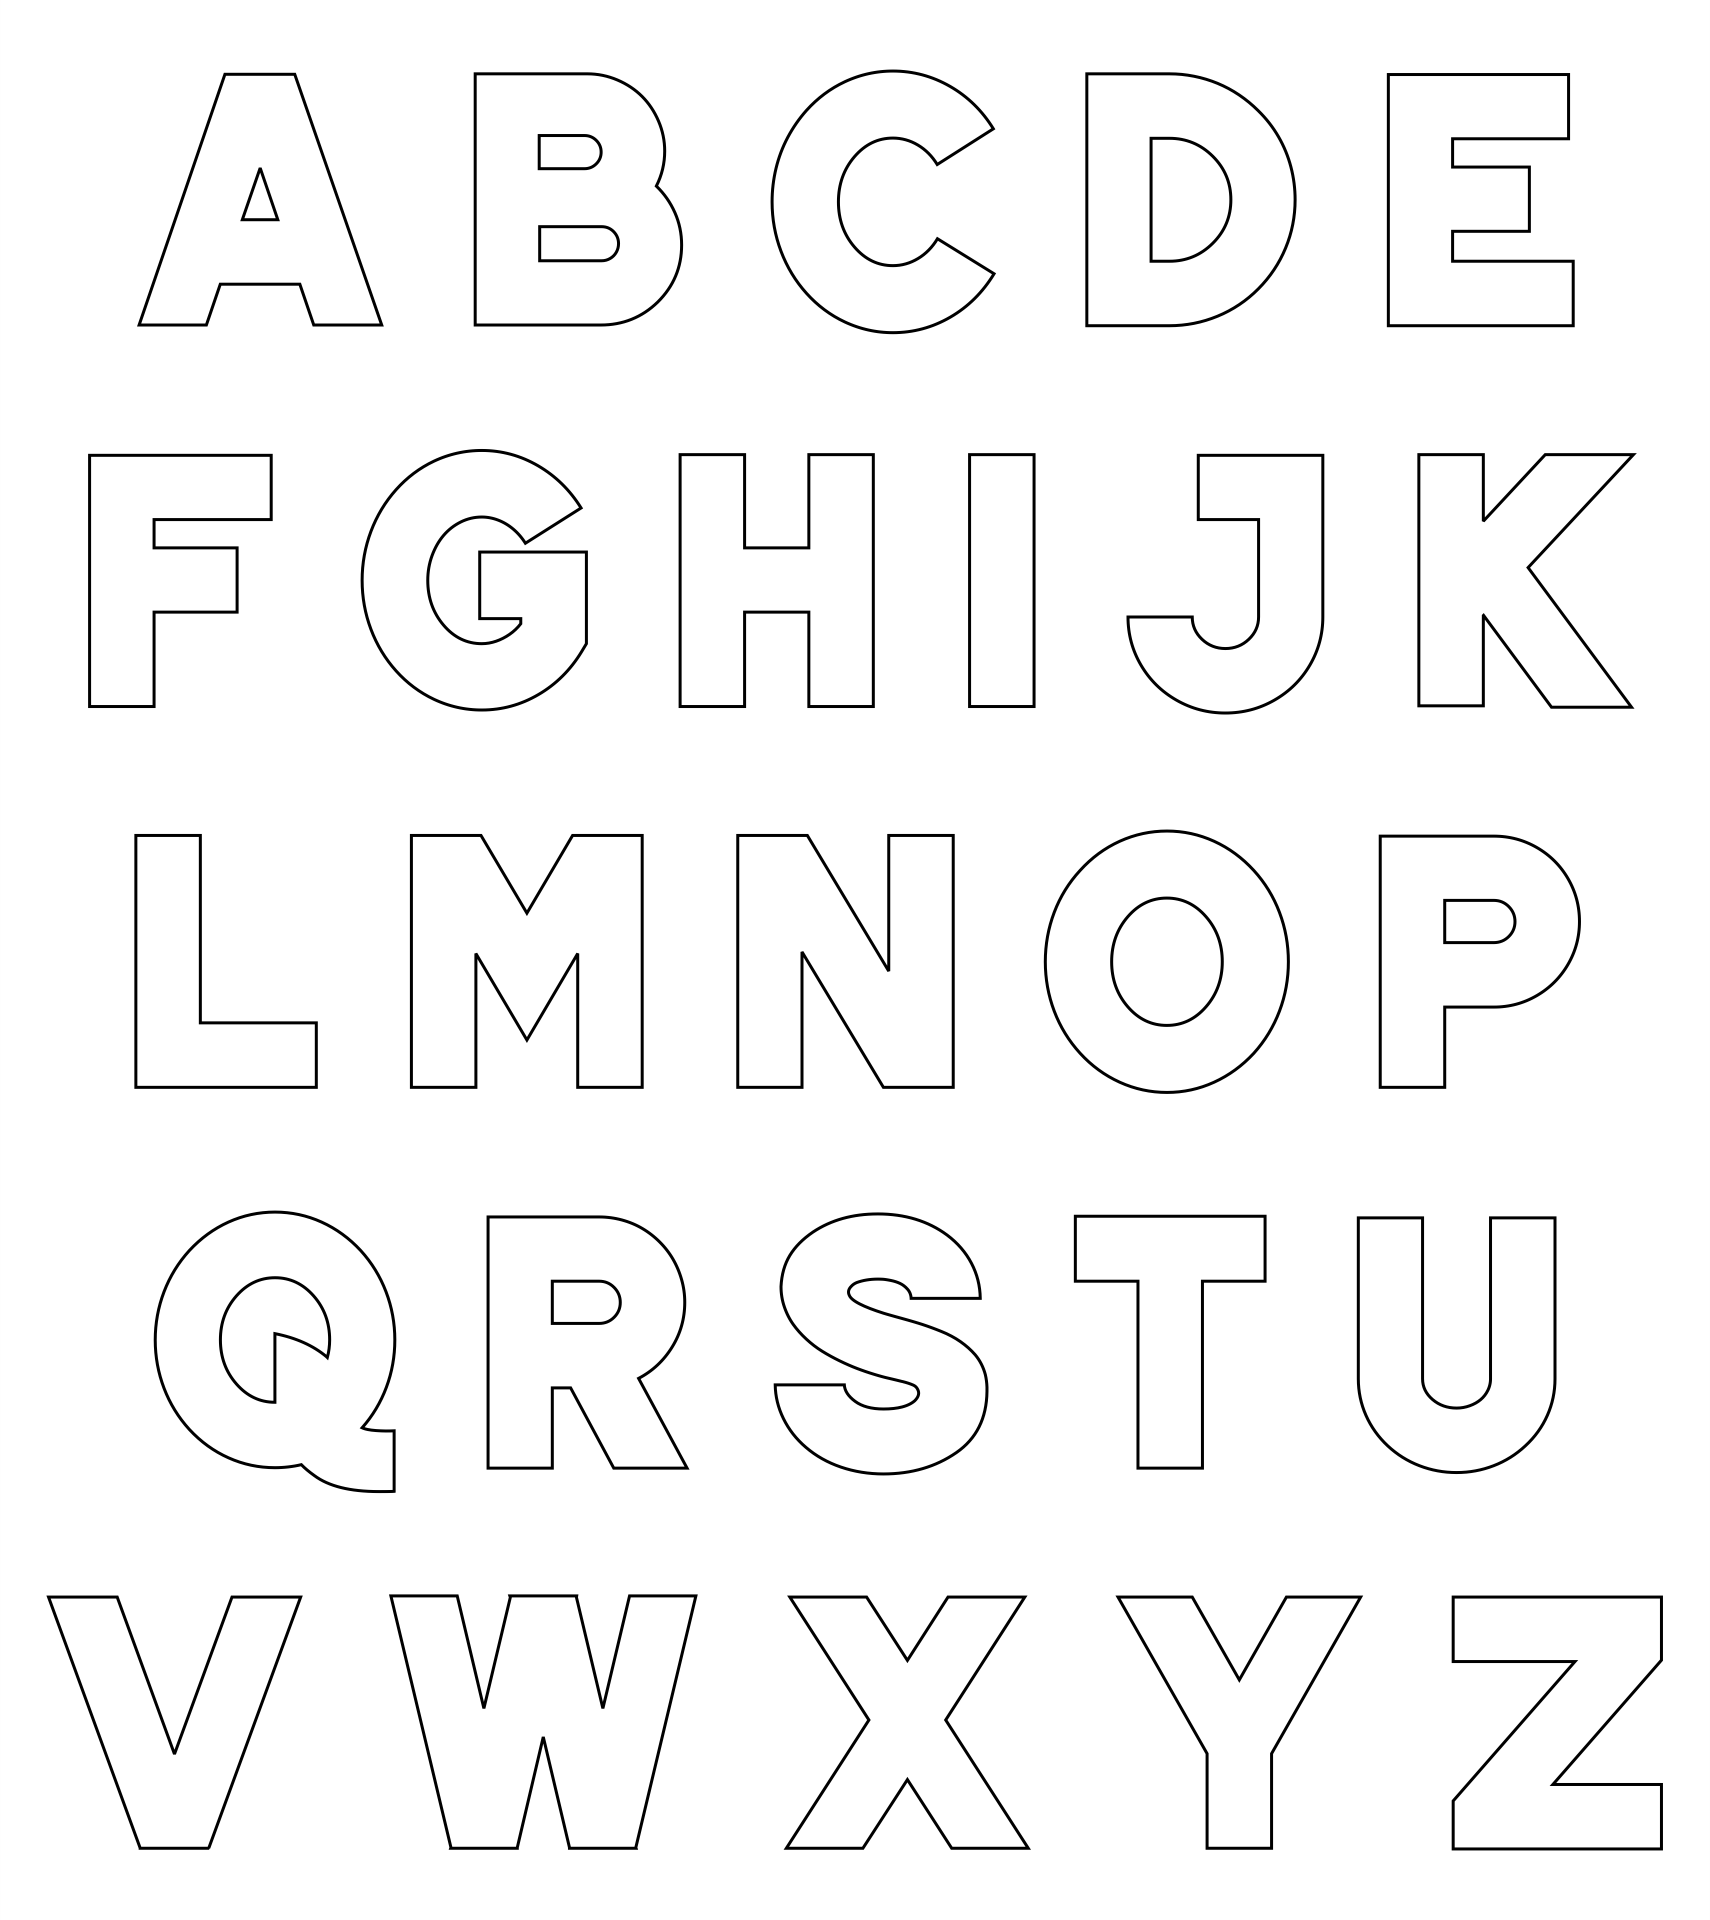 print-giant-letters-of-the-alphabet-large-printable-letters-by